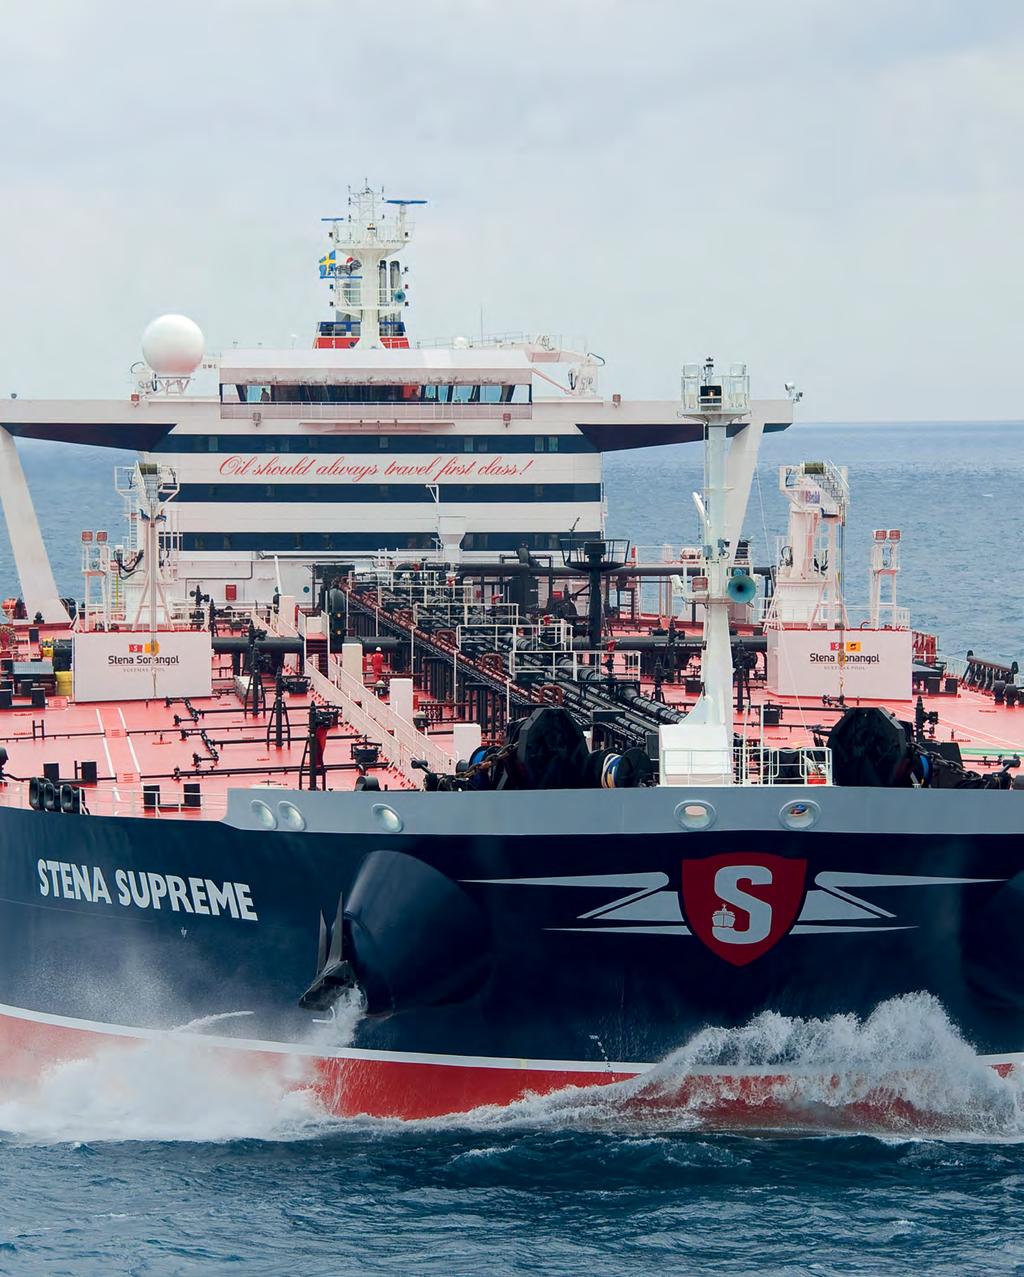 Classification services Bureau Veritas efficient tools and services, and the major role we play within international maritime bodies, ensure we remain at the forefront of oil and chemical tanker